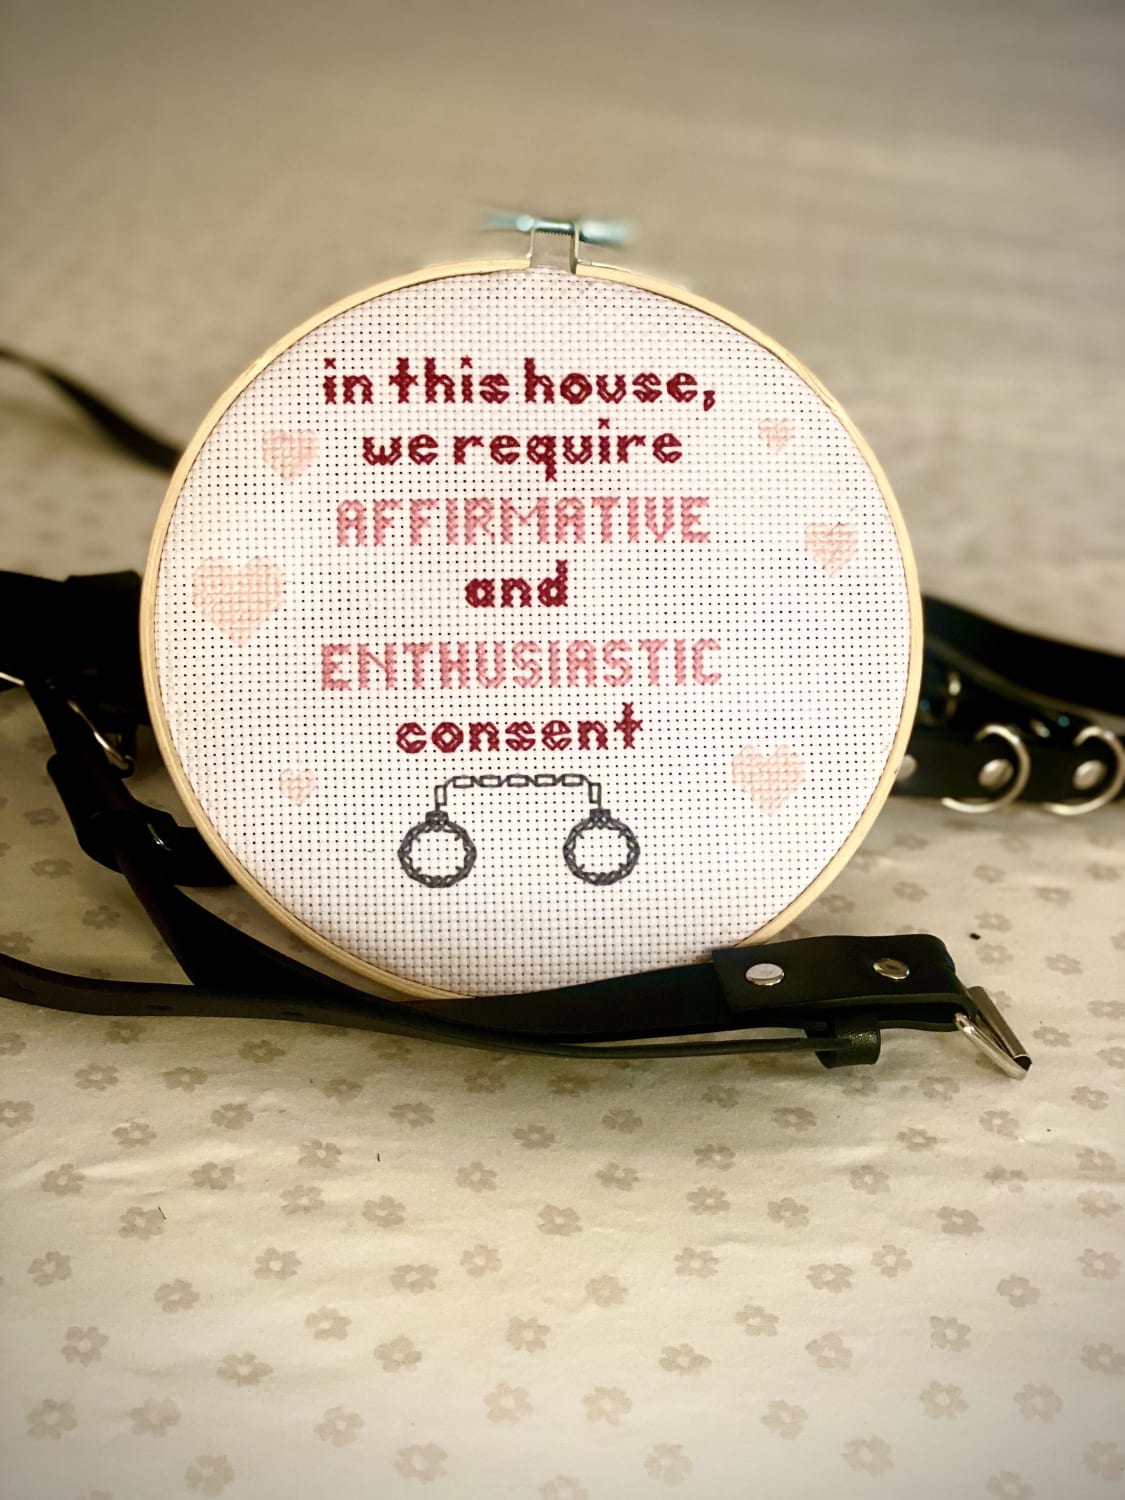 [FO] I dunno where to really share my little stitches, they don’t compare with some of the stuff here, but I’m still rather proud of them. Any advice for a beginner in designing their own patterns and fonts?